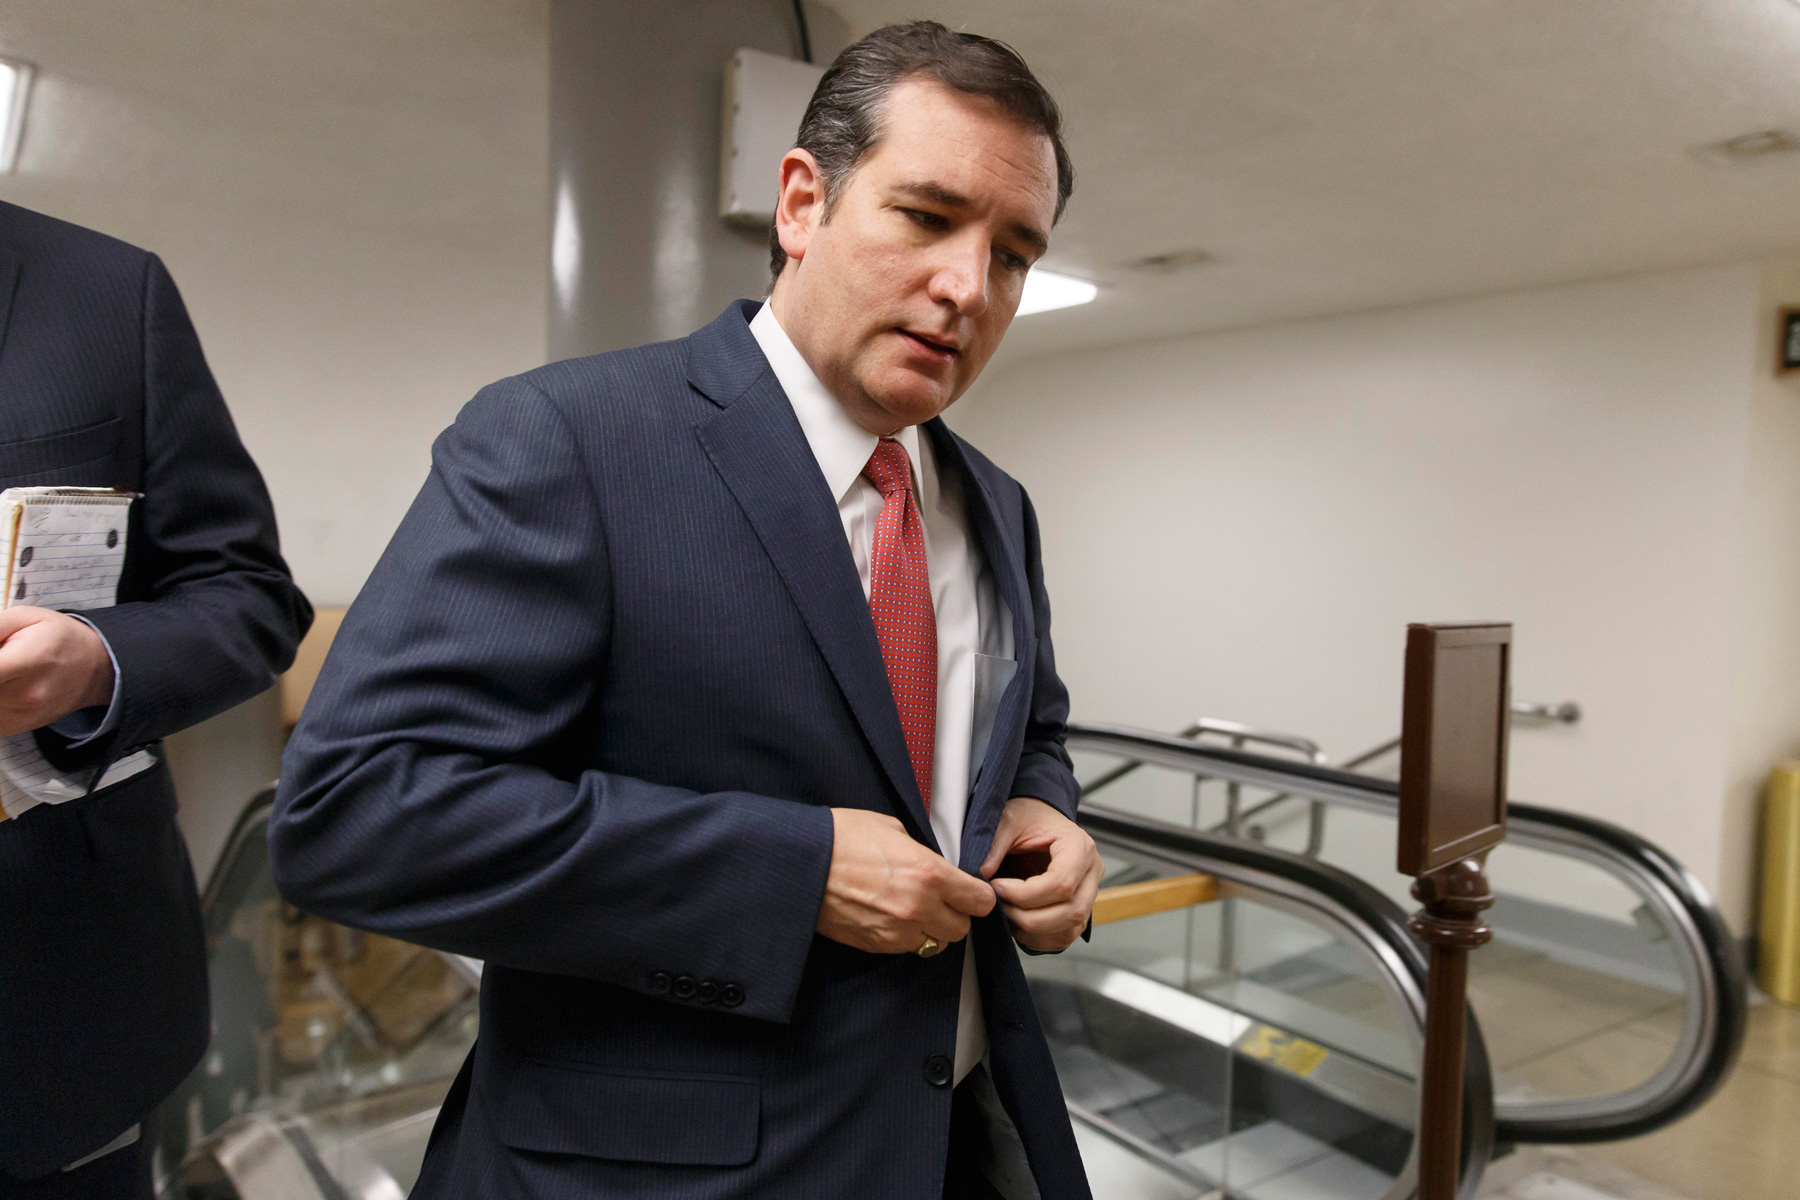 Sen. Ted Cruz arrives at the Capitol as the Senate votes to approve a $1.1 trillion spending package on Jan. 16. It may be the last sign of progress for a while. (J. Scott Applewhite / AP)